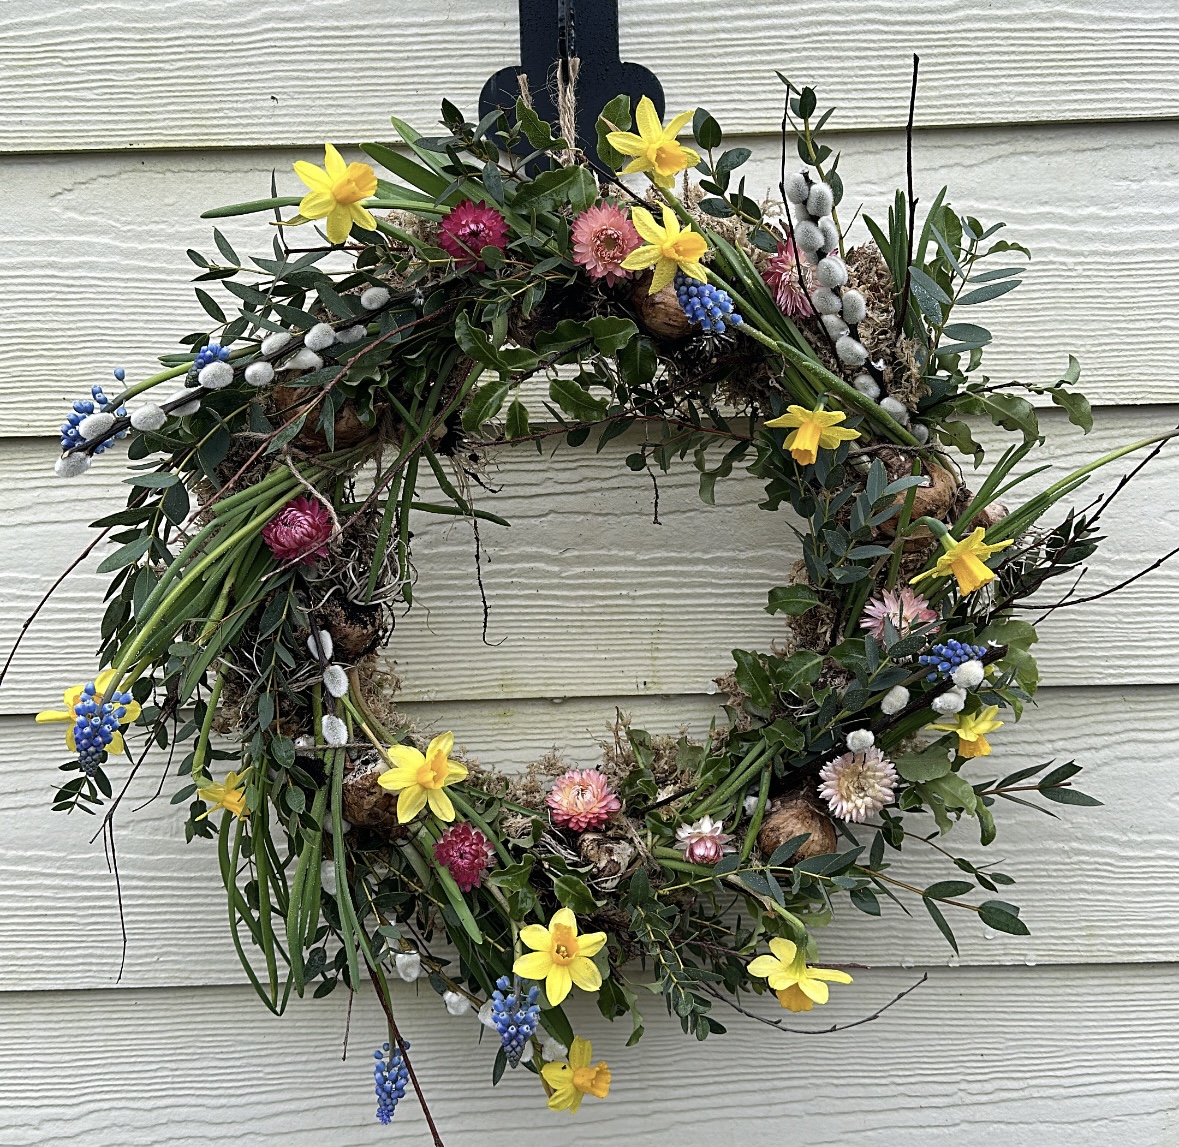 Christmas wreath workshop at The Barn KT9